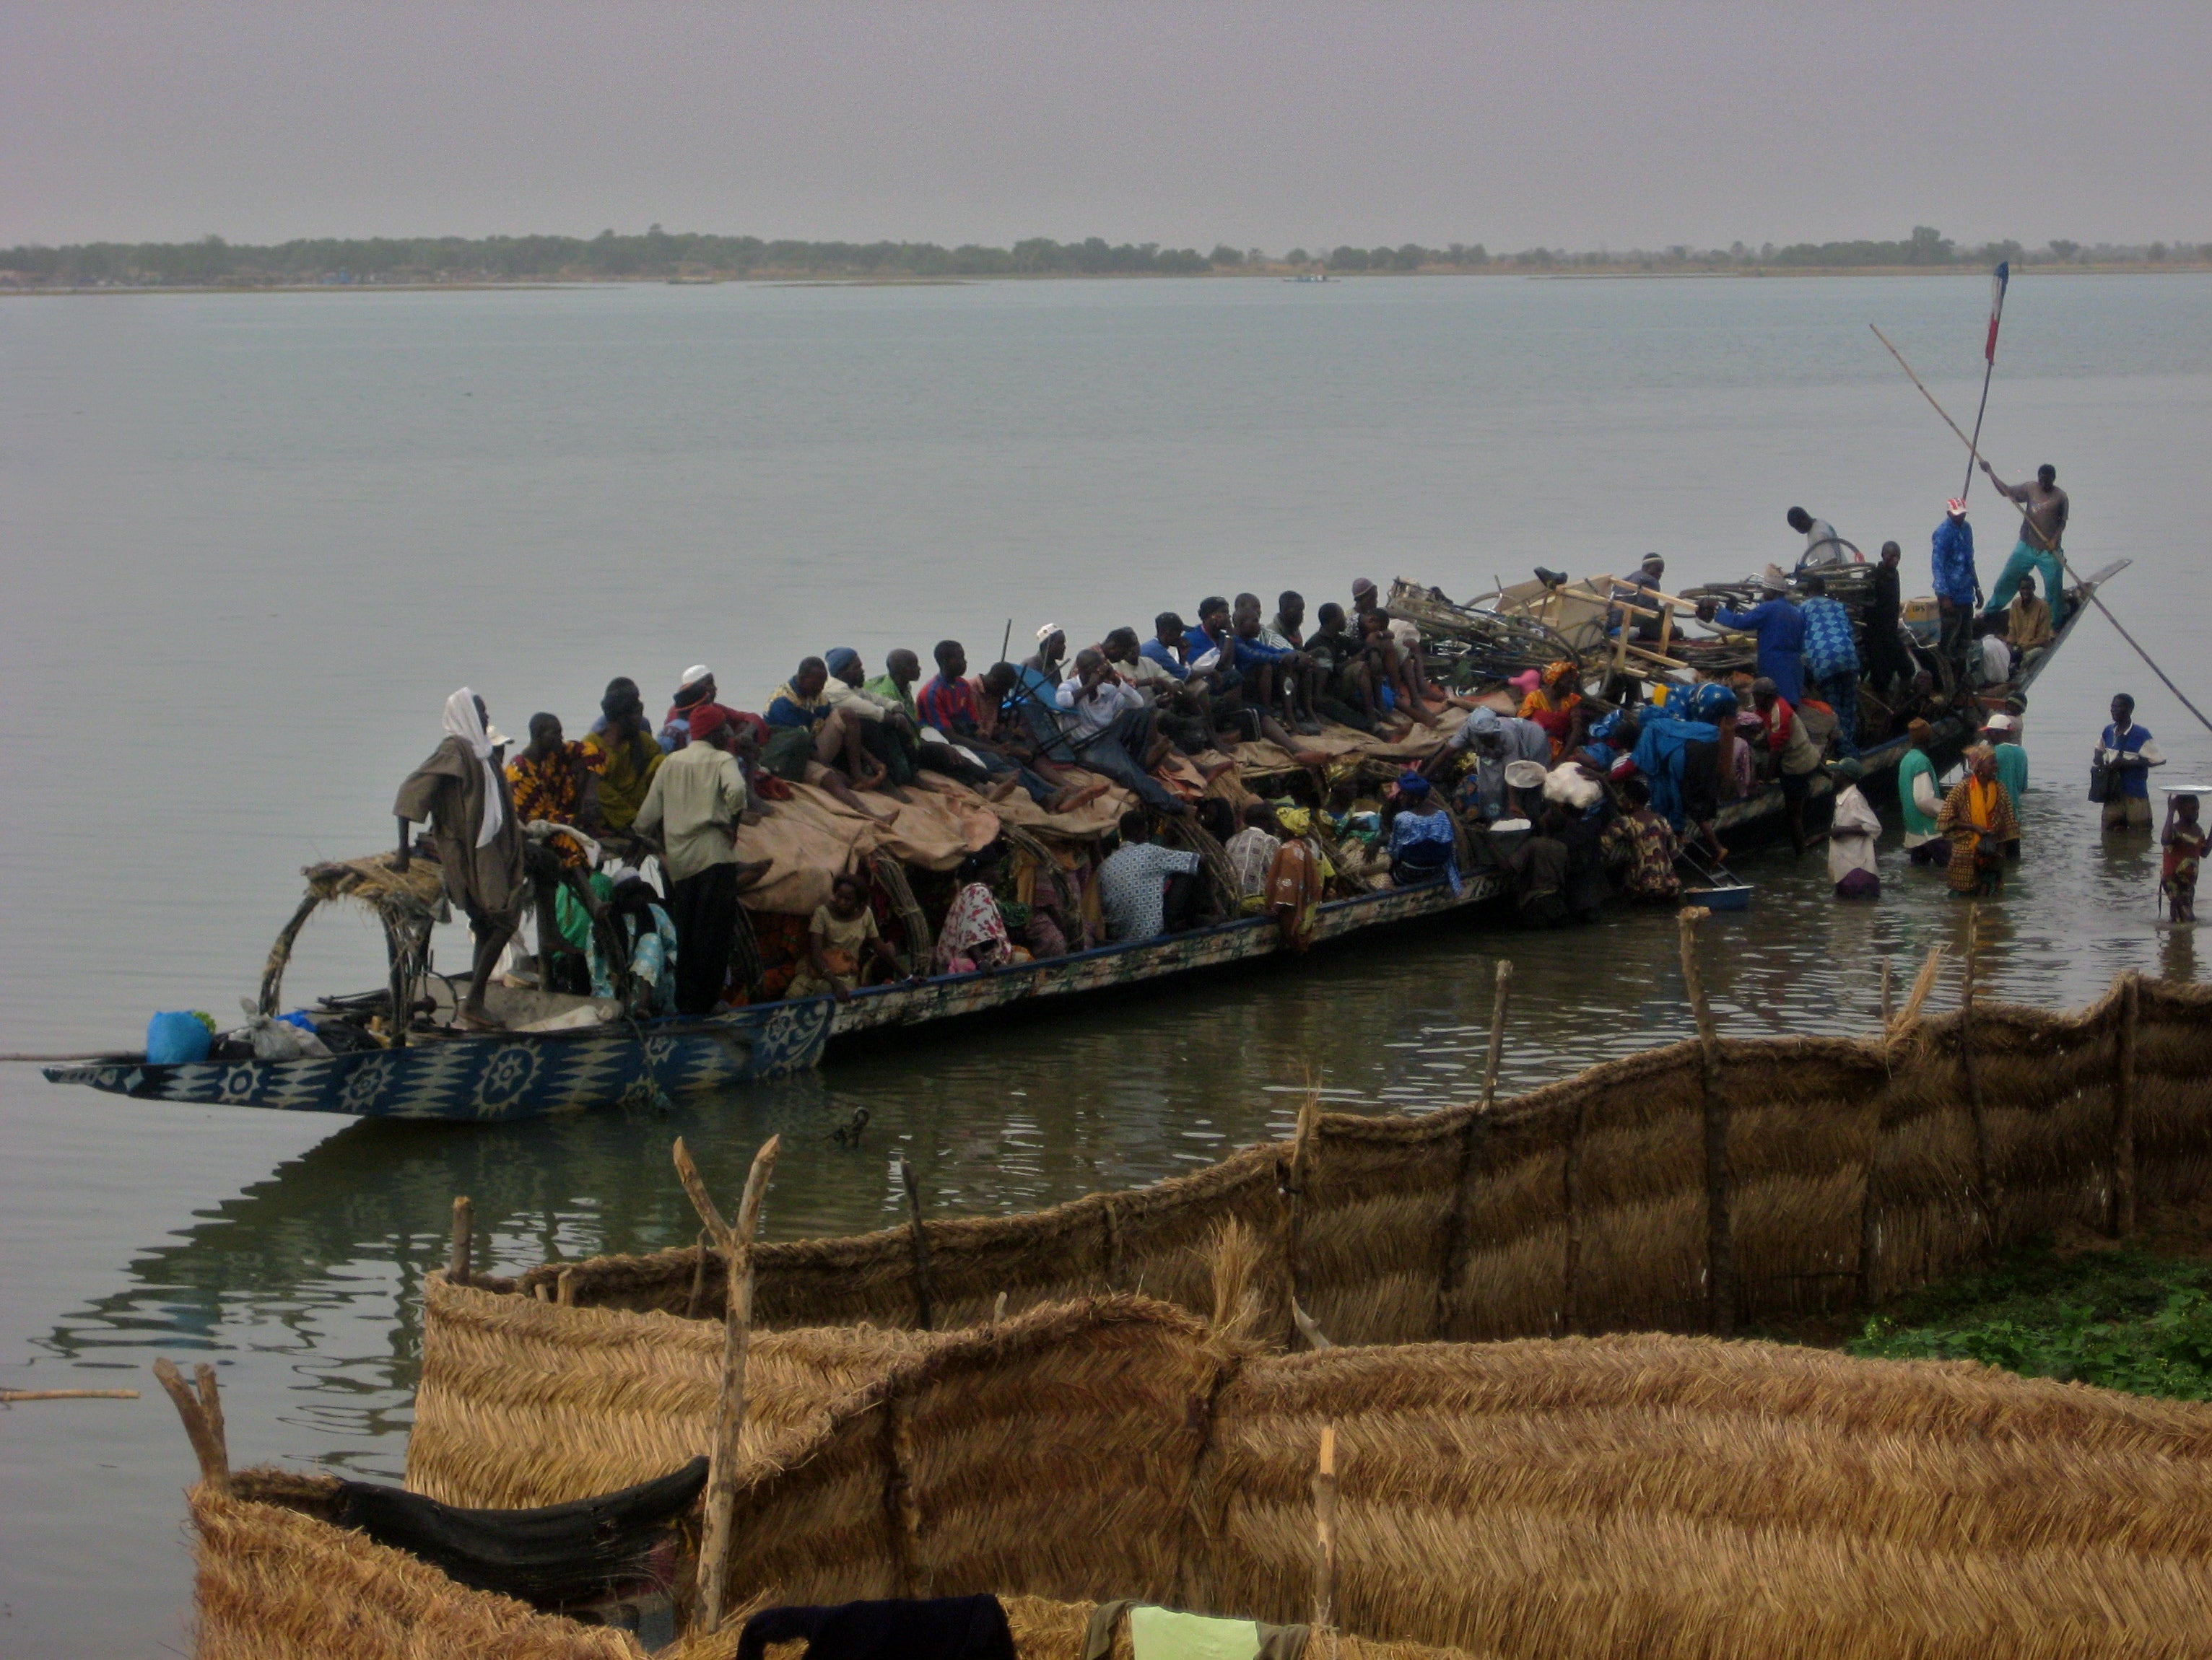 Overcrowding is common on boats on the River Niger